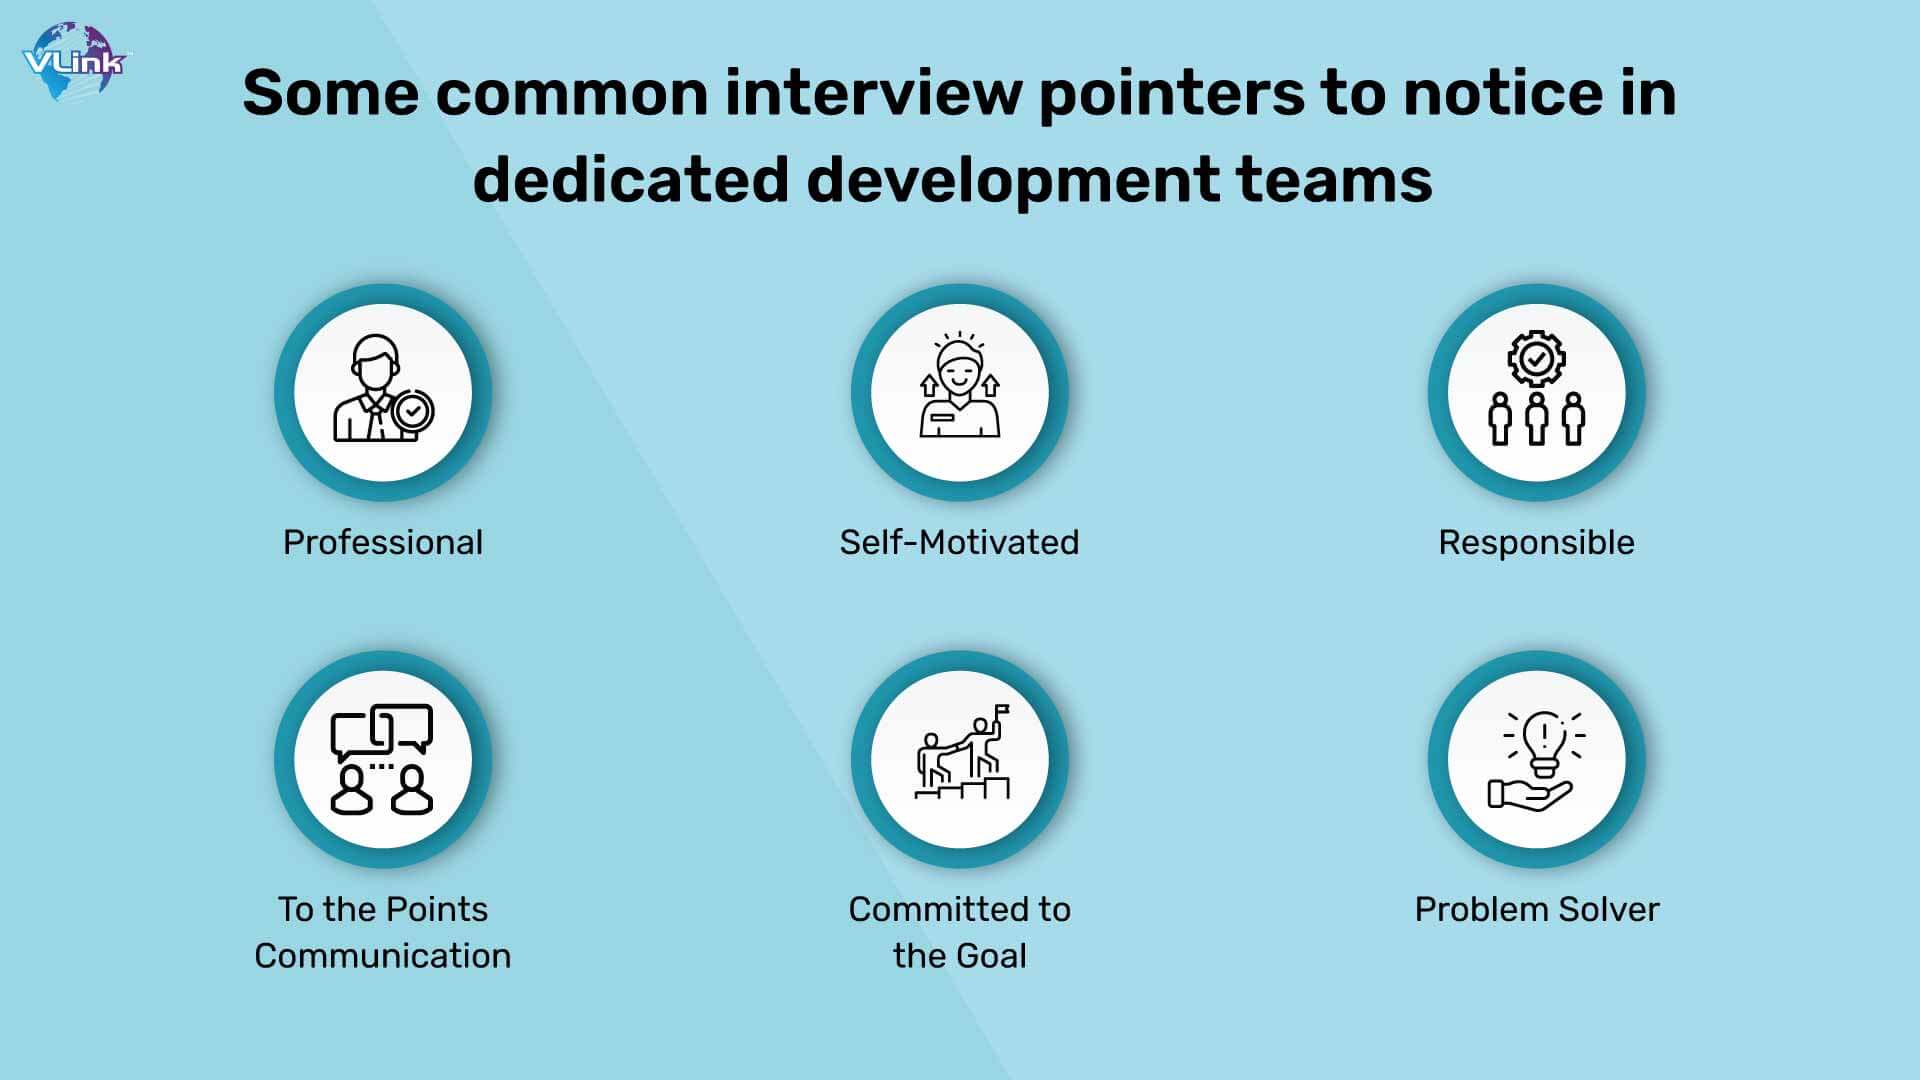 Some common interview pointers to notice in dedicated development teams